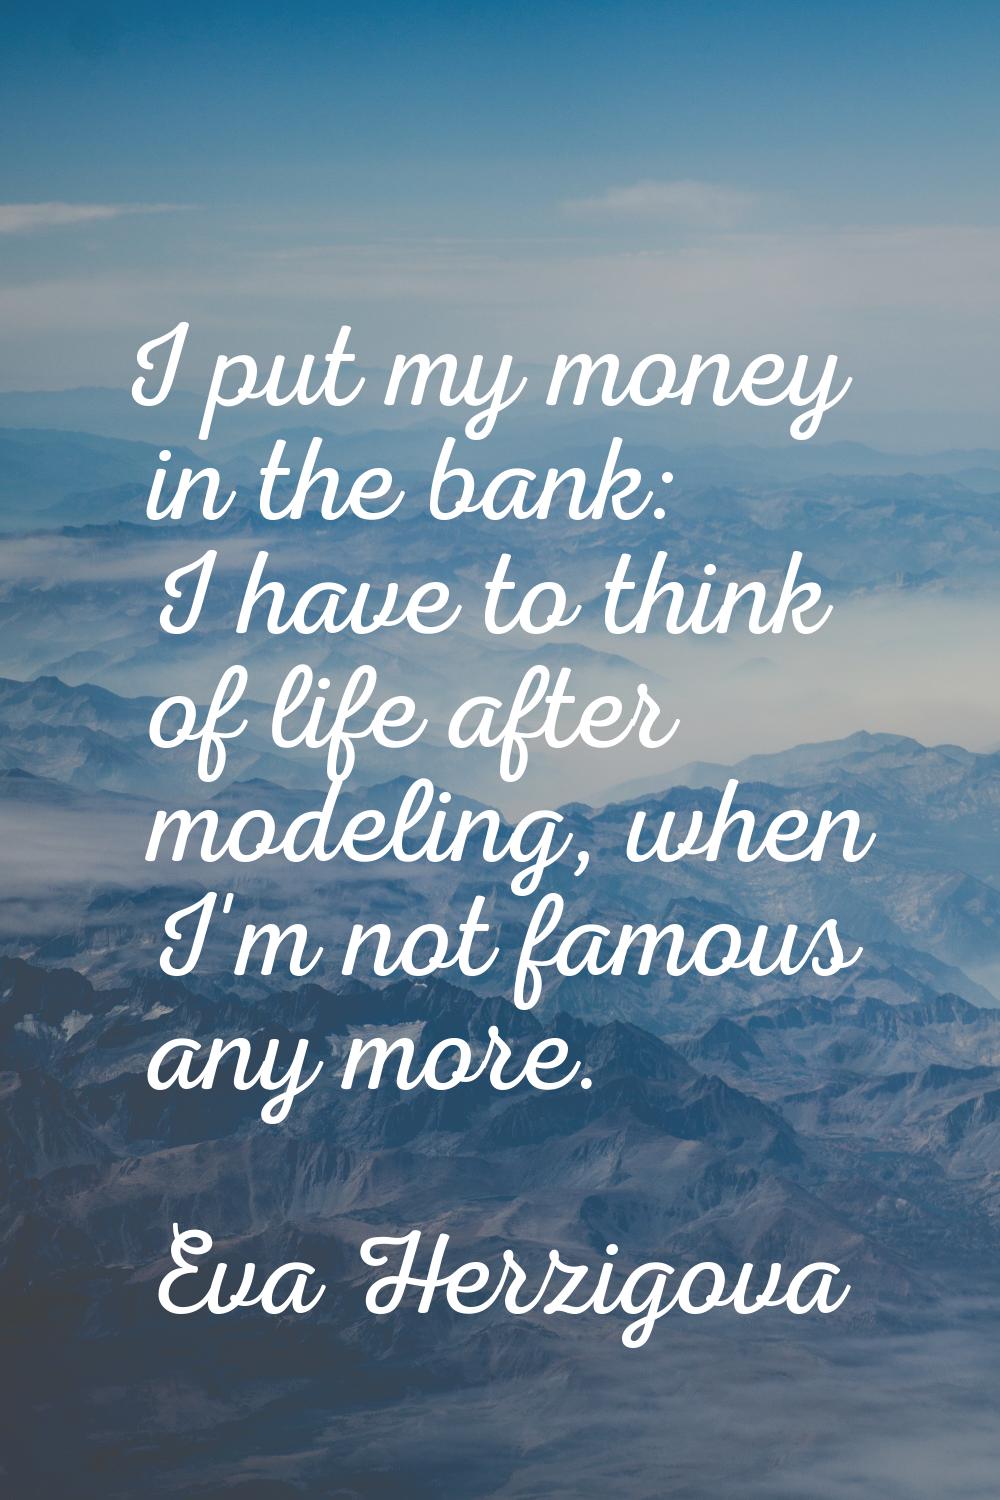 I put my money in the bank: I have to think of life after modeling, when I'm not famous any more.